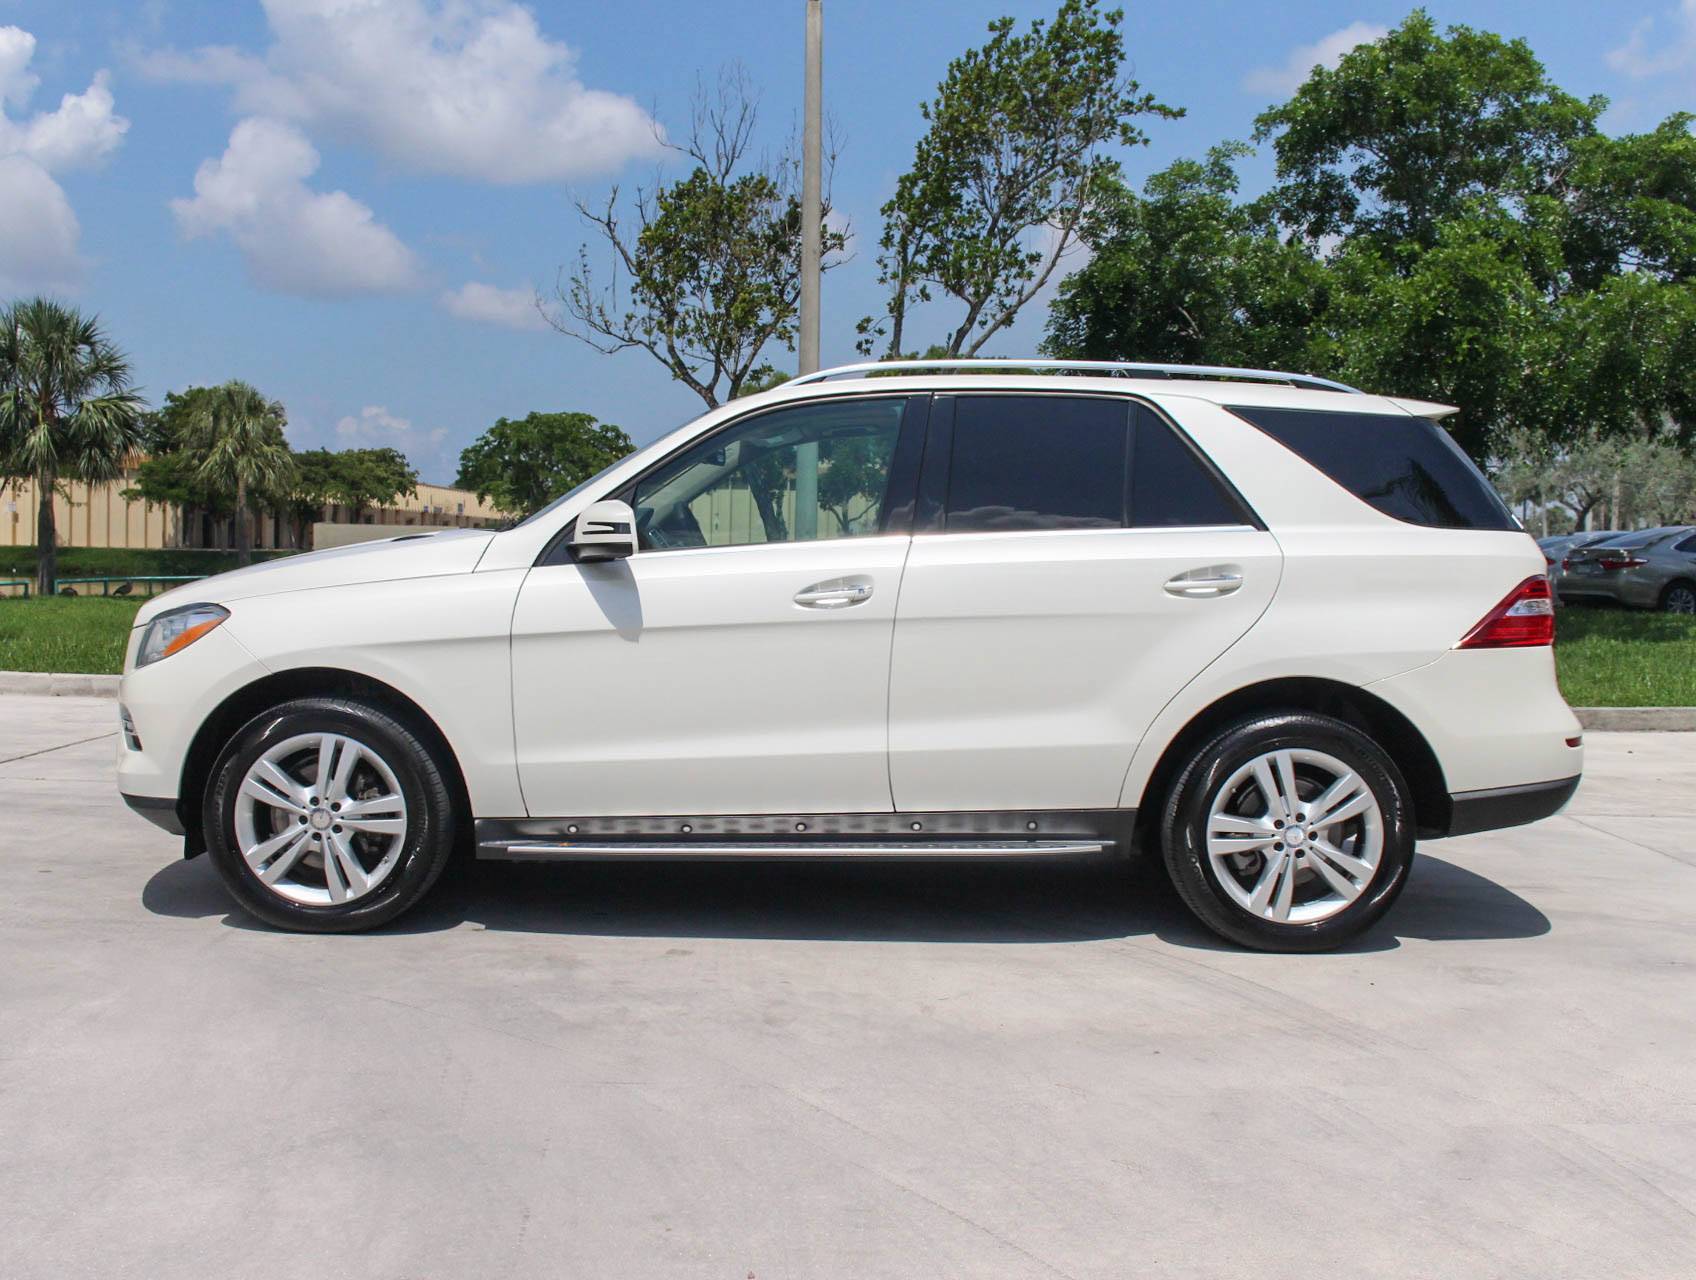 Used 2014 MERCEDES-BENZ M CLASS ML350 BLUETEC for sale in MARGATE | 94699